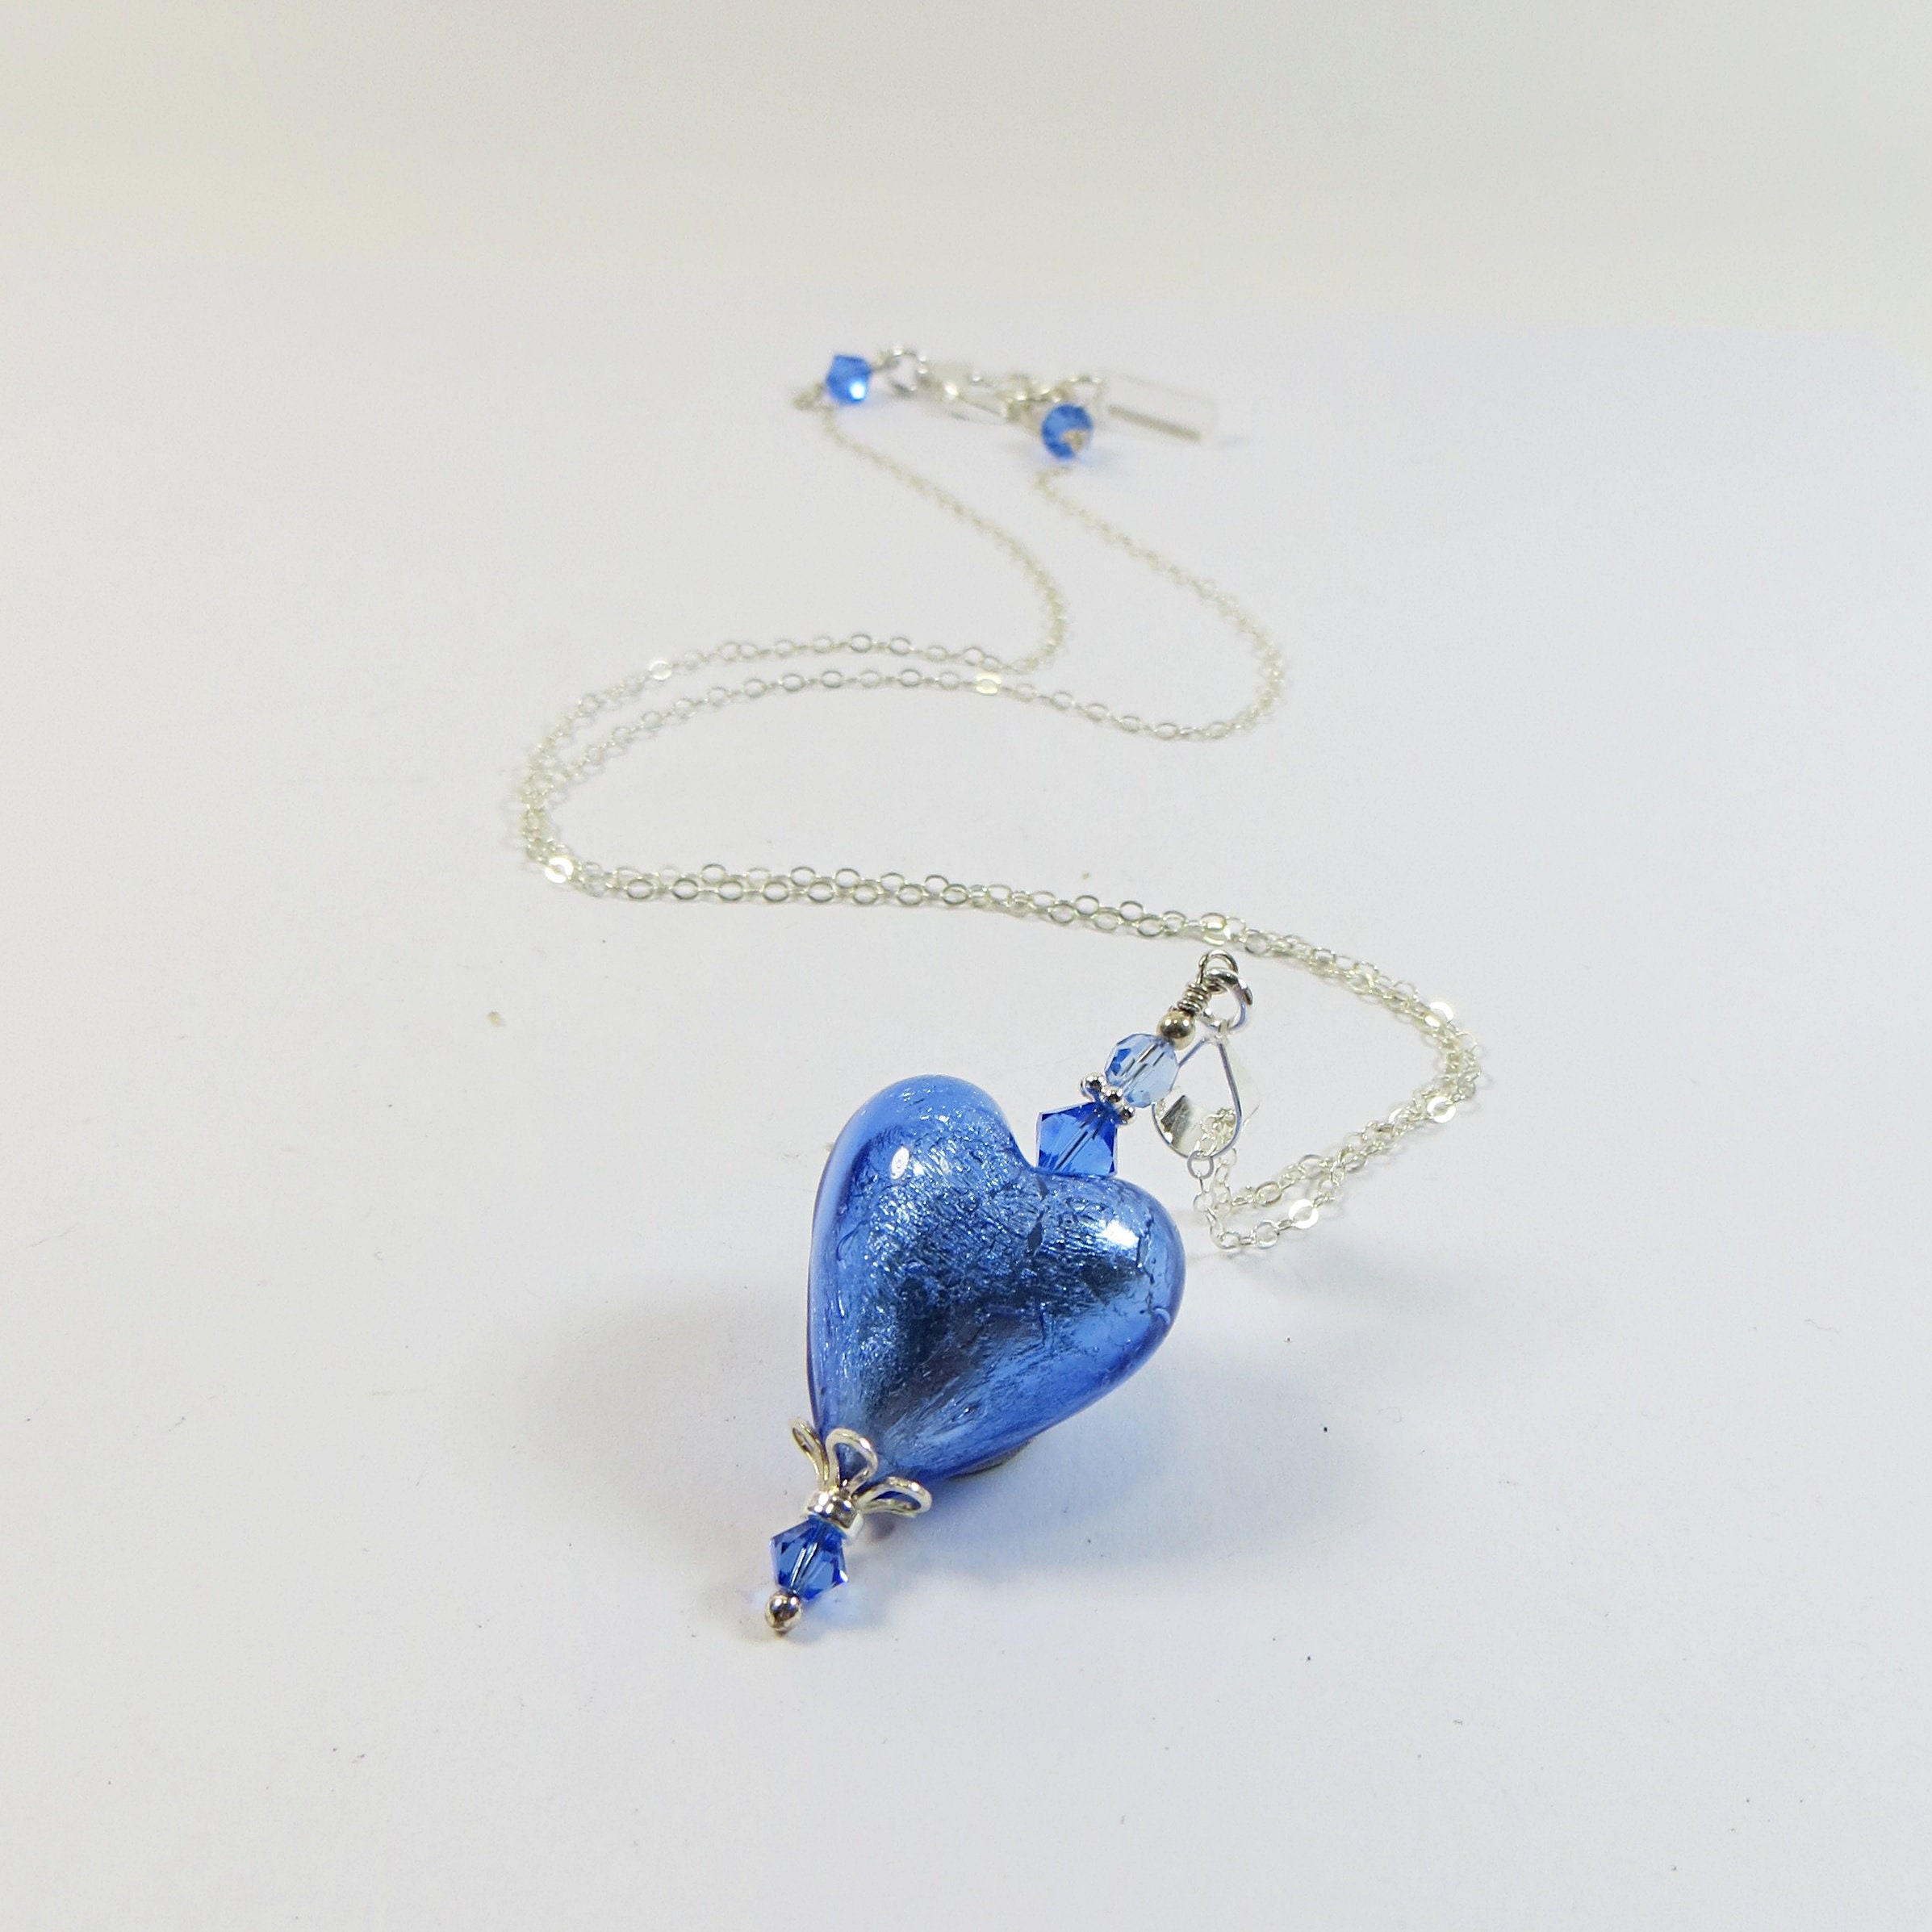 Murano Glass Venetian Love Heart Necklace - Silver and Blue